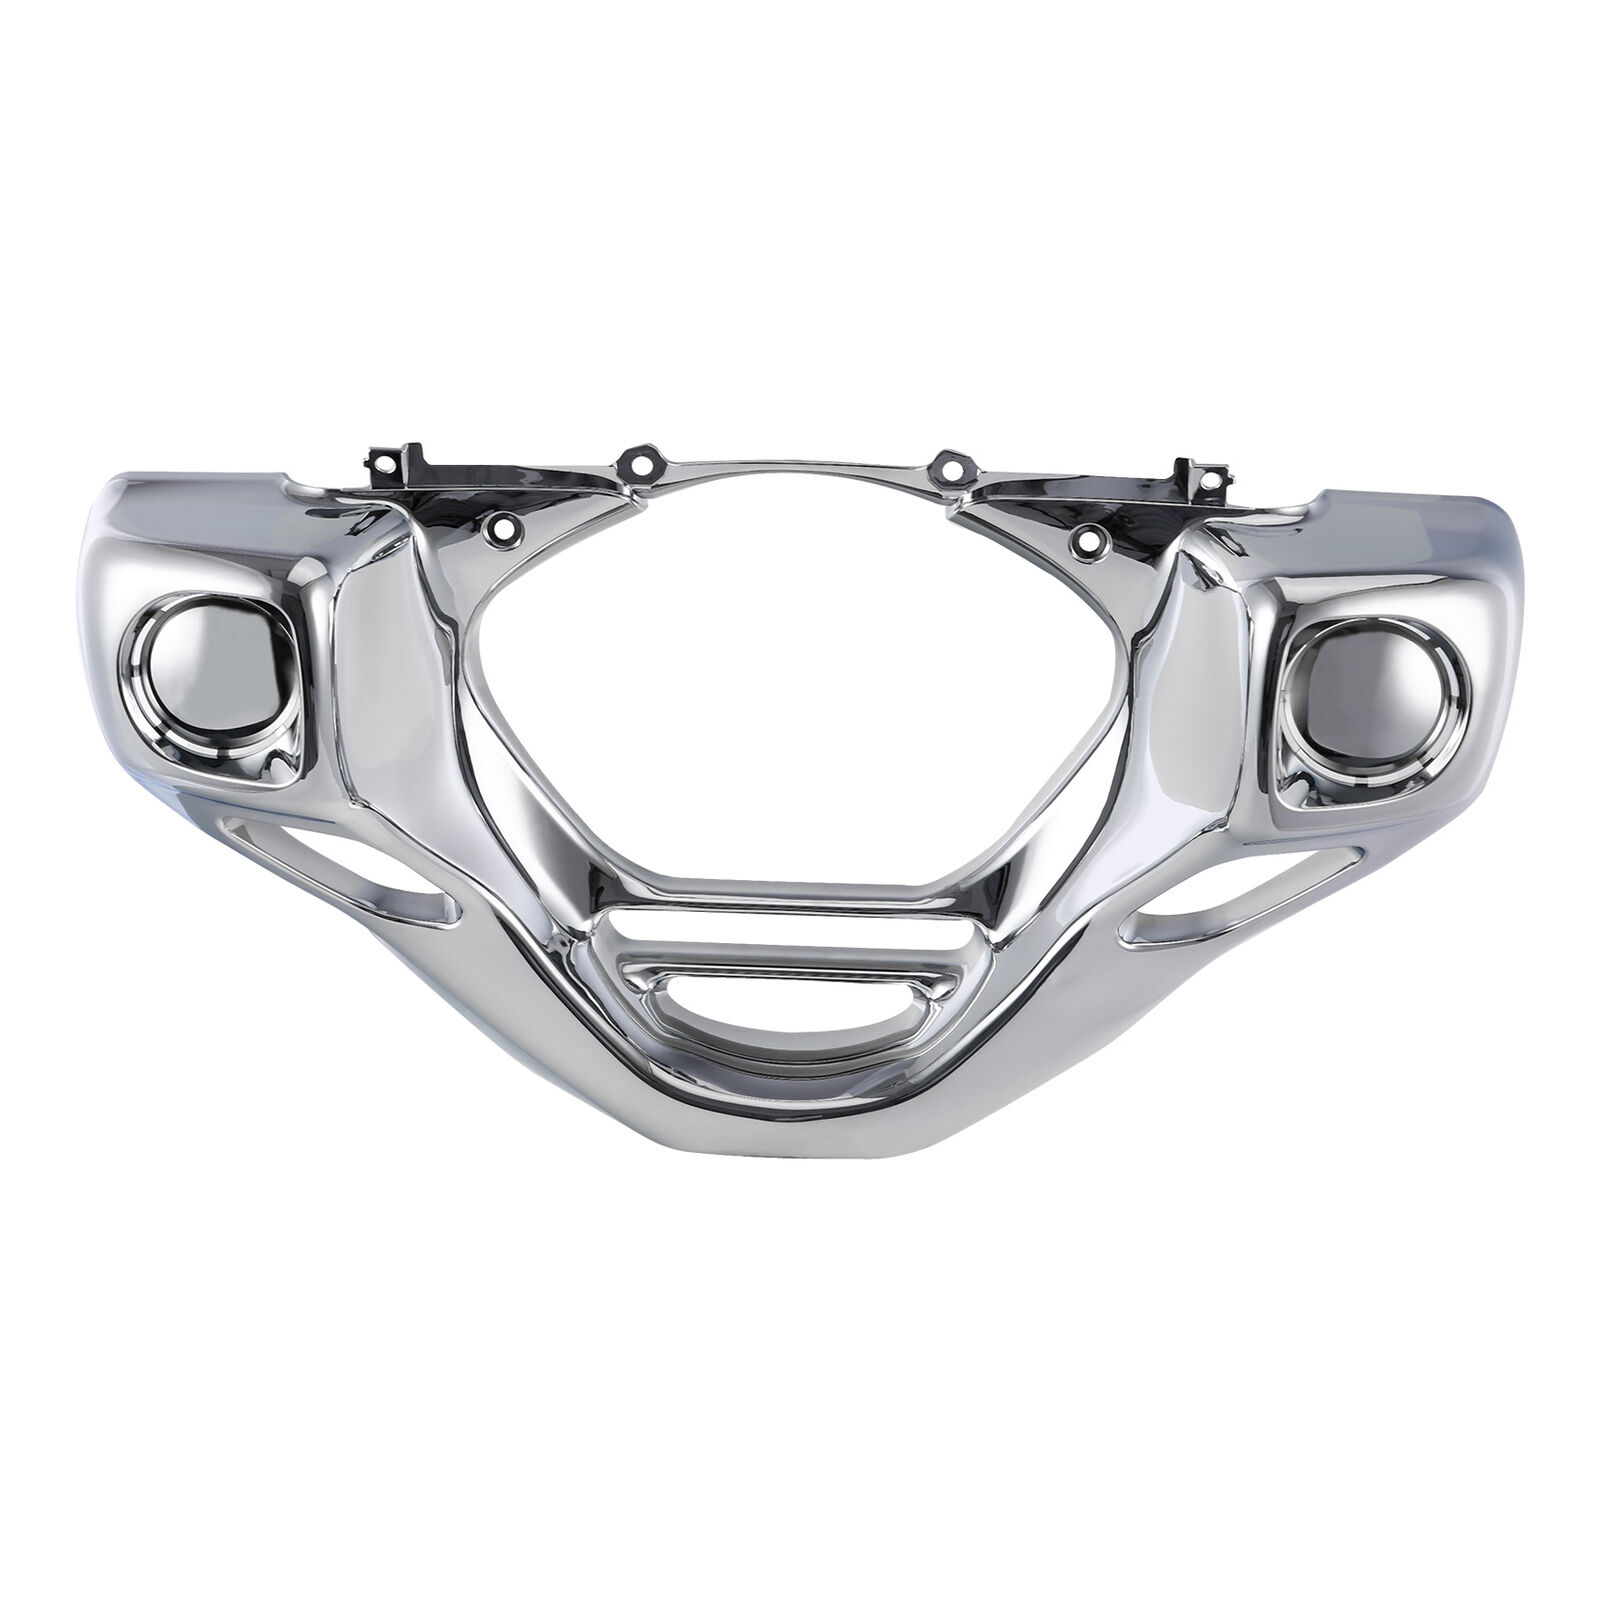 Chrome Engine Front Cowl Cover Fairing Fit For Honda Goldwing GL1800  2001-2011